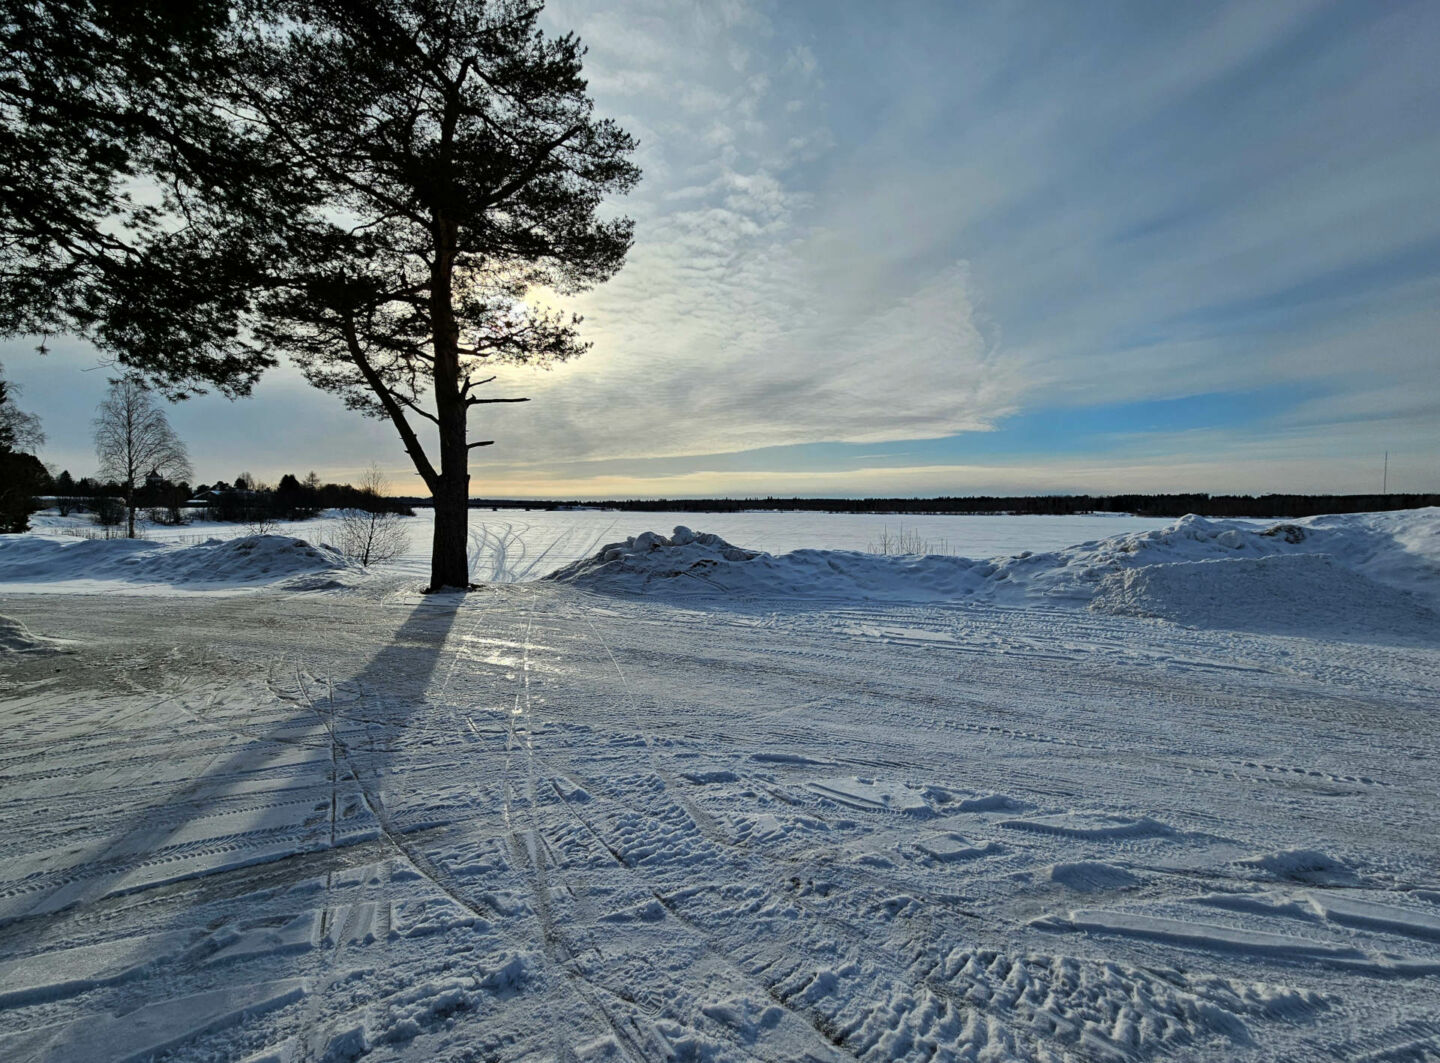 A winter view in Tervola, a riverside haven travel destination in Finnish Lapland